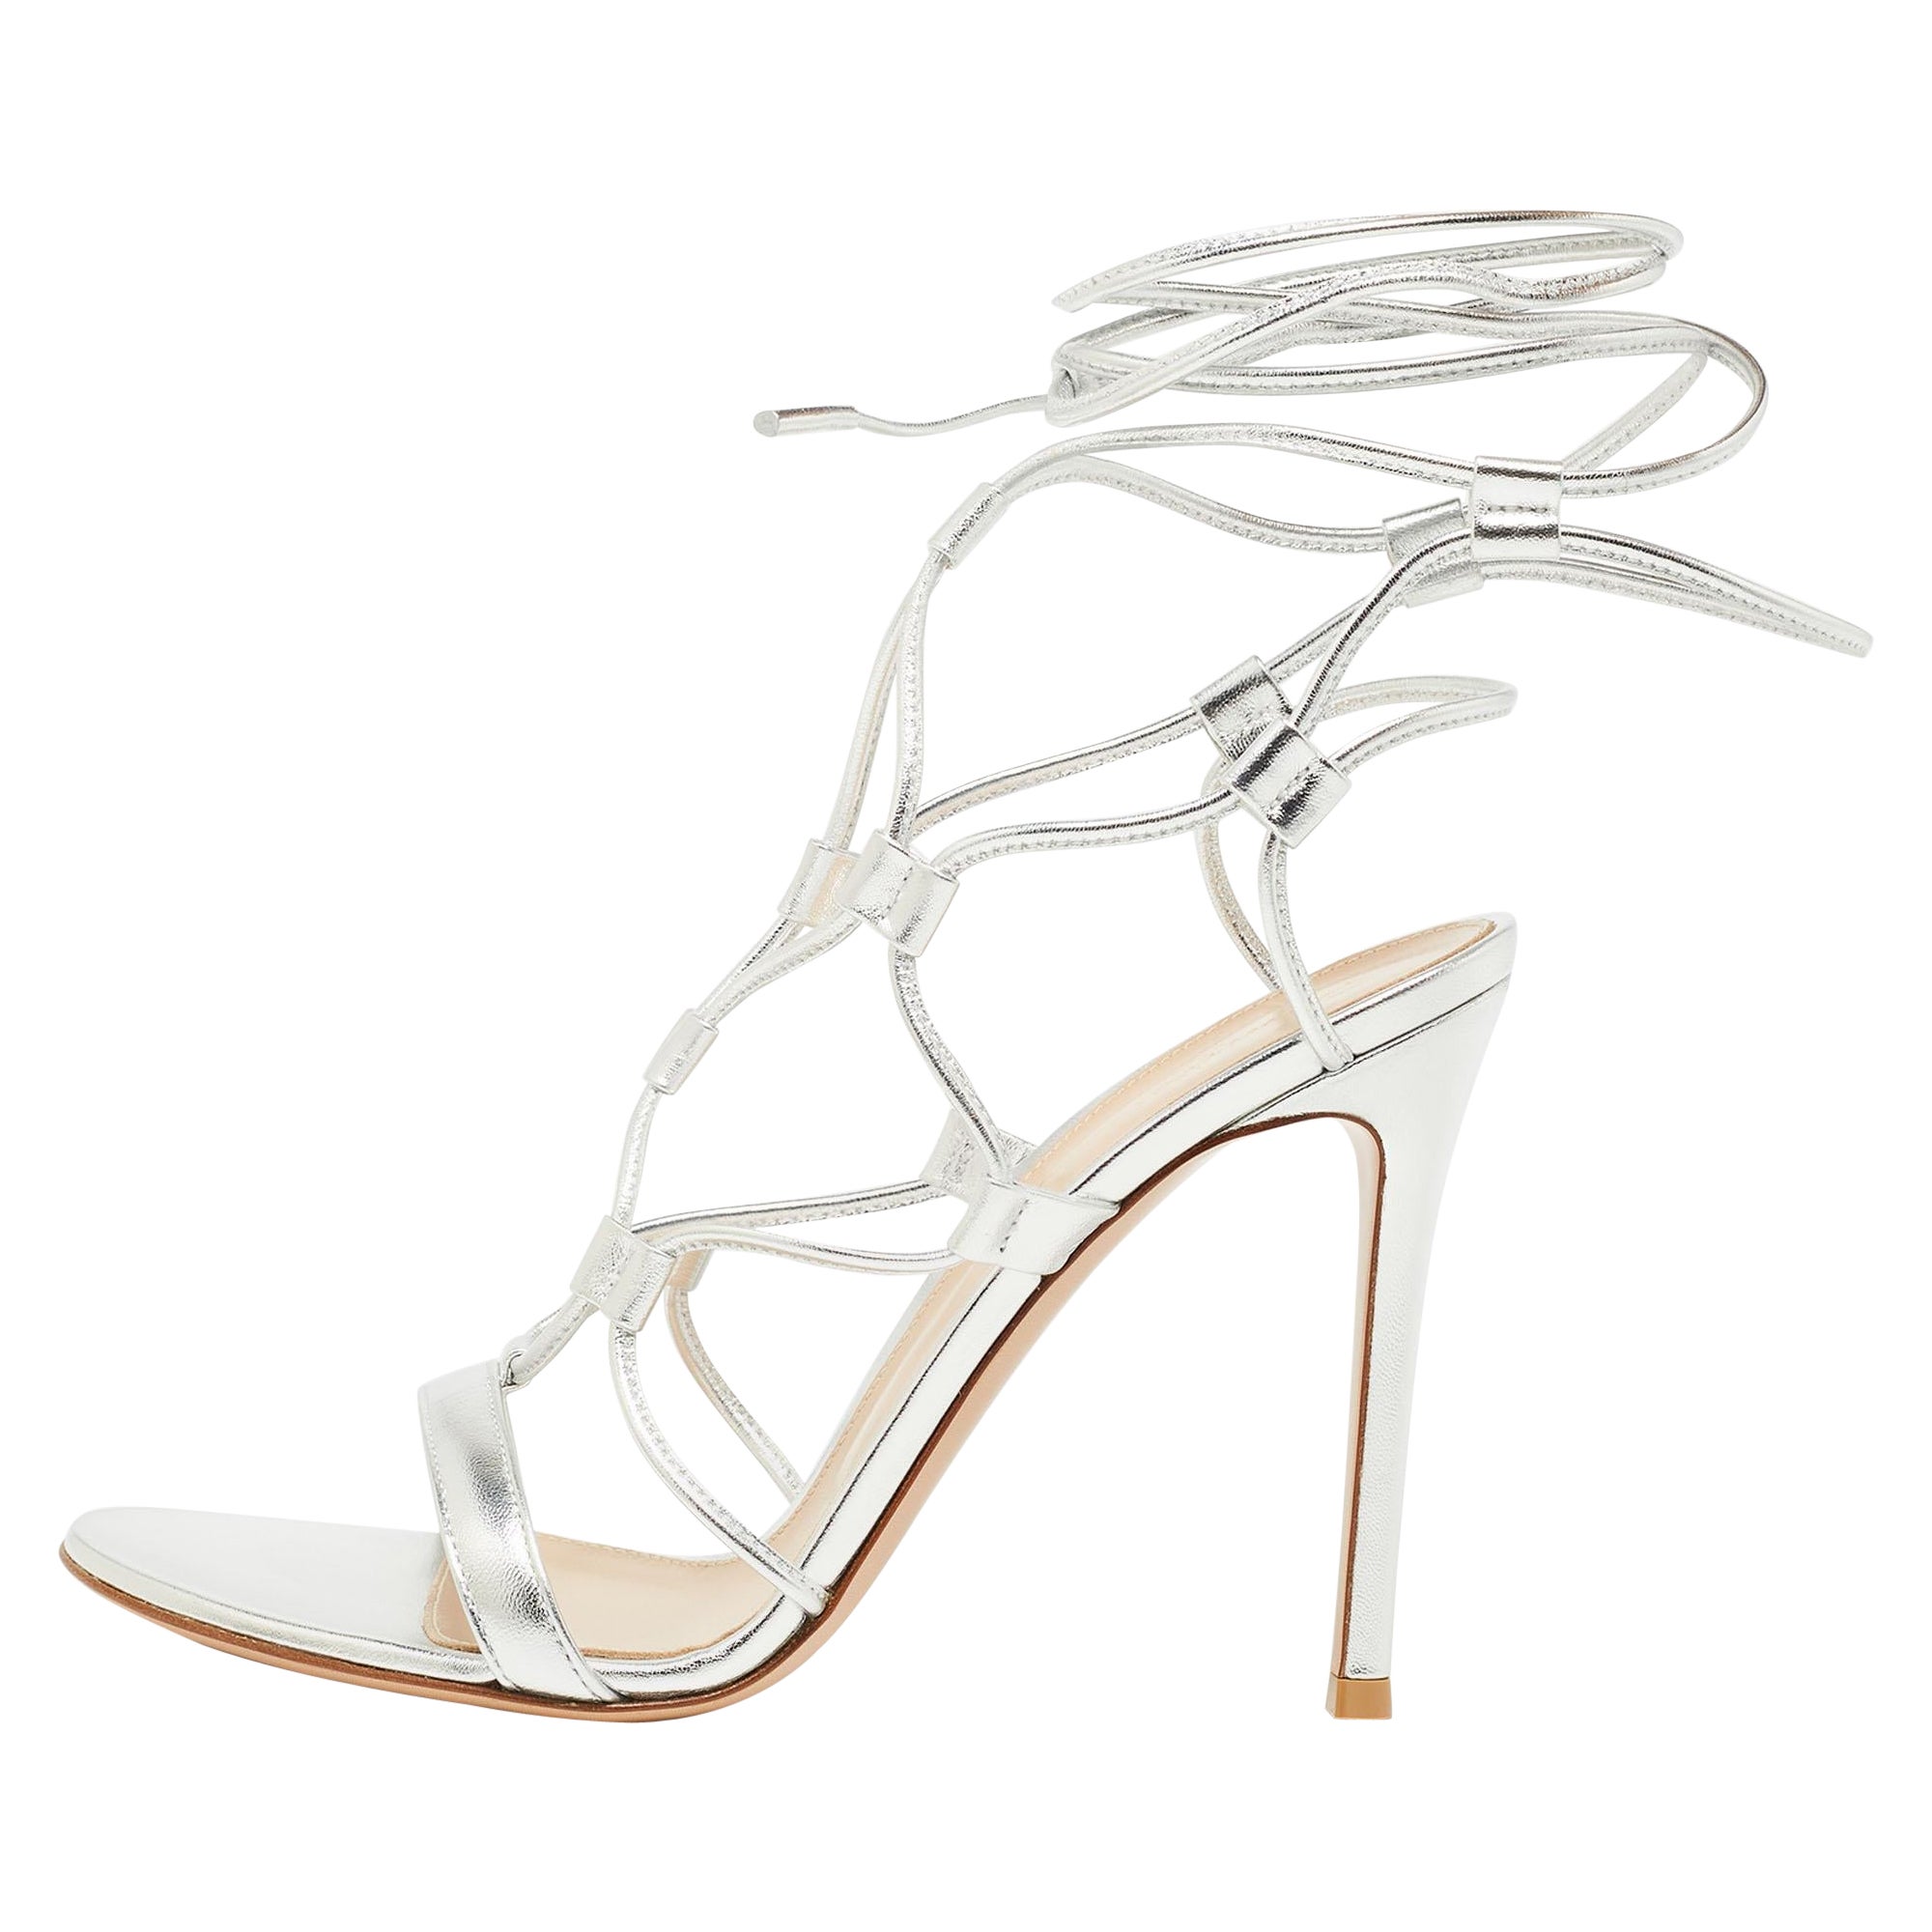 Is Gianvito Rossi a luxury brand?